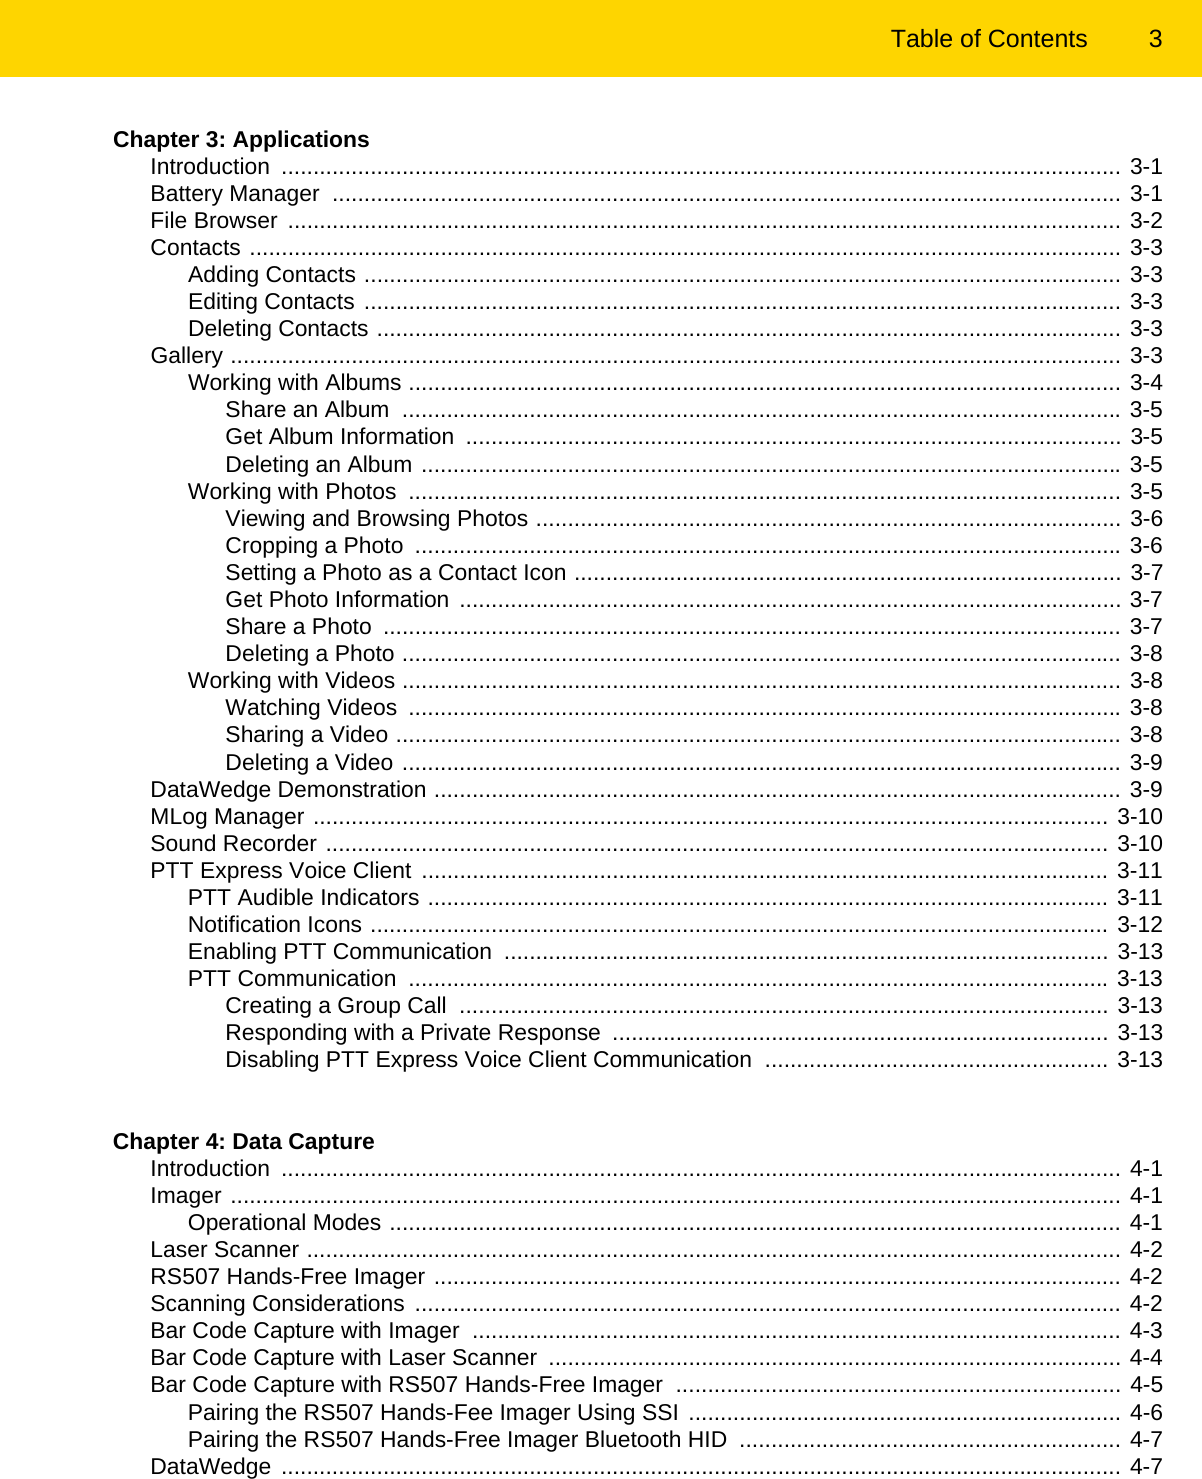 Table of Contents 3Chapter 3: ApplicationsIntroduction .................................................................................................................................... 3-1Battery Manager  ............................................................................................................................ 3-1File Browser  ................................................................................................................................... 3-2Contacts ......................................................................................................................................... 3-3Adding Contacts ....................................................................................................................... 3-3Editing Contacts ....................................................................................................................... 3-3Deleting Contacts ..................................................................................................................... 3-3Gallery ............................................................................................................................................ 3-3Working with Albums ................................................................................................................ 3-4Share an Album  ................................................................................................................. 3-5Get Album Information  ....................................................................................................... 3-5Deleting an Album .............................................................................................................. 3-5Working with Photos  ................................................................................................................ 3-5Viewing and Browsing Photos ............................................................................................ 3-6Cropping a Photo  ............................................................................................................... 3-6Setting a Photo as a Contact Icon ...................................................................................... 3-7Get Photo Information ........................................................................................................ 3-7Share a Photo  .................................................................................................................... 3-7Deleting a Photo ................................................................................................................. 3-8Working with Videos ................................................................................................................. 3-8Watching Videos  ................................................................................................................ 3-8Sharing a Video .................................................................................................................. 3-8Deleting a Video ................................................................................................................. 3-9DataWedge Demonstration ............................................................................................................ 3-9MLog Manager ............................................................................................................................. 3-10Sound Recorder ........................................................................................................................... 3-10PTT Express Voice Client  ............................................................................................................ 3-11PTT Audible Indicators ........................................................................................................... 3-11Notification Icons .................................................................................................................... 3-12Enabling PTT Communication  ............................................................................................... 3-13PTT Communication  .............................................................................................................. 3-13Creating a Group Call  ...................................................................................................... 3-13Responding with a Private Response  .............................................................................. 3-13Disabling PTT Express Voice Client Communication  ...................................................... 3-13Chapter 4: Data CaptureIntroduction .................................................................................................................................... 4-1Imager ............................................................................................................................................ 4-1Operational Modes ................................................................................................................... 4-1Laser Scanner ................................................................................................................................ 4-2RS507 Hands-Free Imager ............................................................................................................ 4-2Scanning Considerations ............................................................................................................... 4-2Bar Code Capture with Imager  ...................................................................................................... 4-3Bar Code Capture with Laser Scanner  .......................................................................................... 4-4Bar Code Capture with RS507 Hands-Free Imager  ...................................................................... 4-5Pairing the RS507 Hands-Fee Imager Using SSI .................................................................... 4-6Pairing the RS507 Hands-Free Imager Bluetooth HID  ............................................................ 4-7DataWedge .................................................................................................................................... 4-7REVIEW ONLY - REVIEW ONLY - REVIEW ONLY                             REVIEW ONLY - REVIEW ONLY - REVIEW ONLY